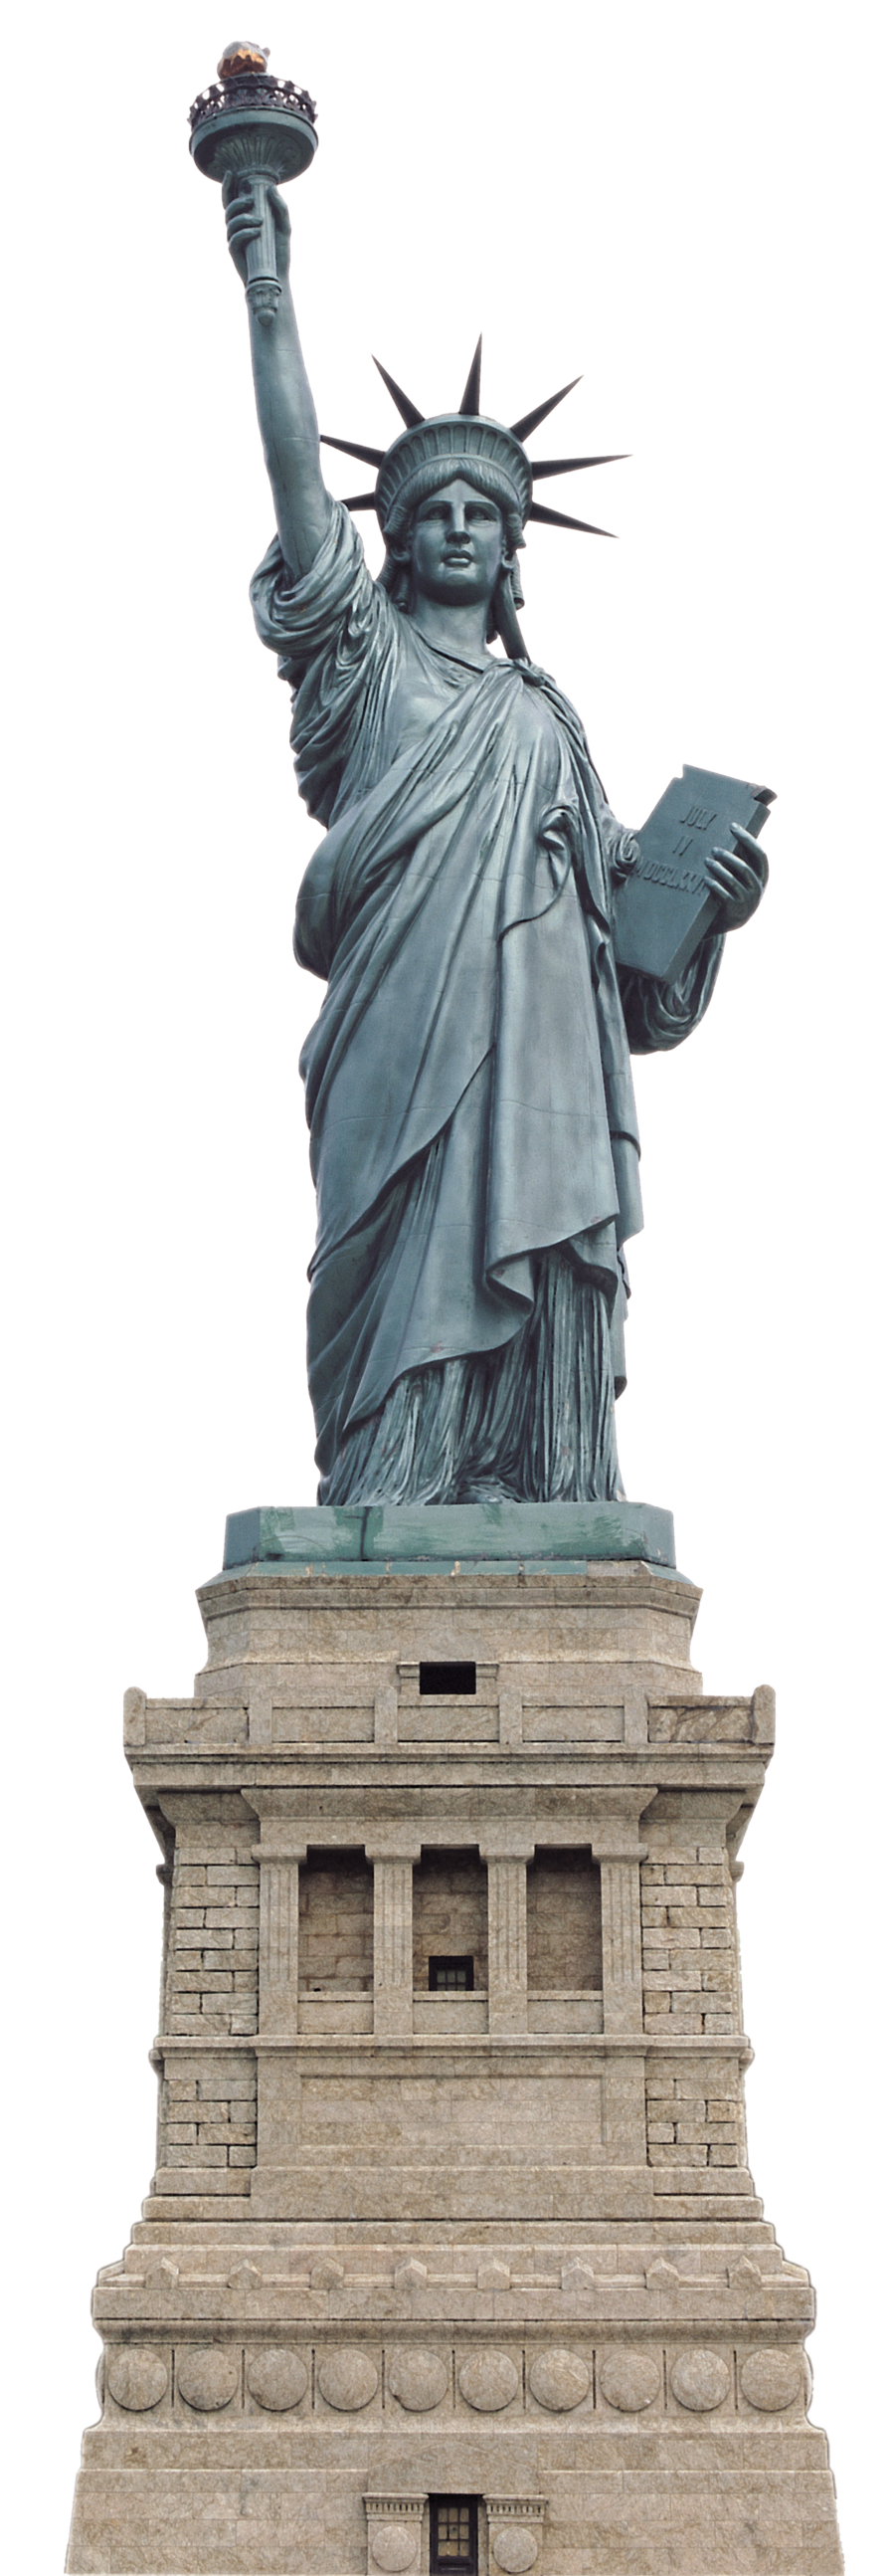 Image:Statue of Liberty.png